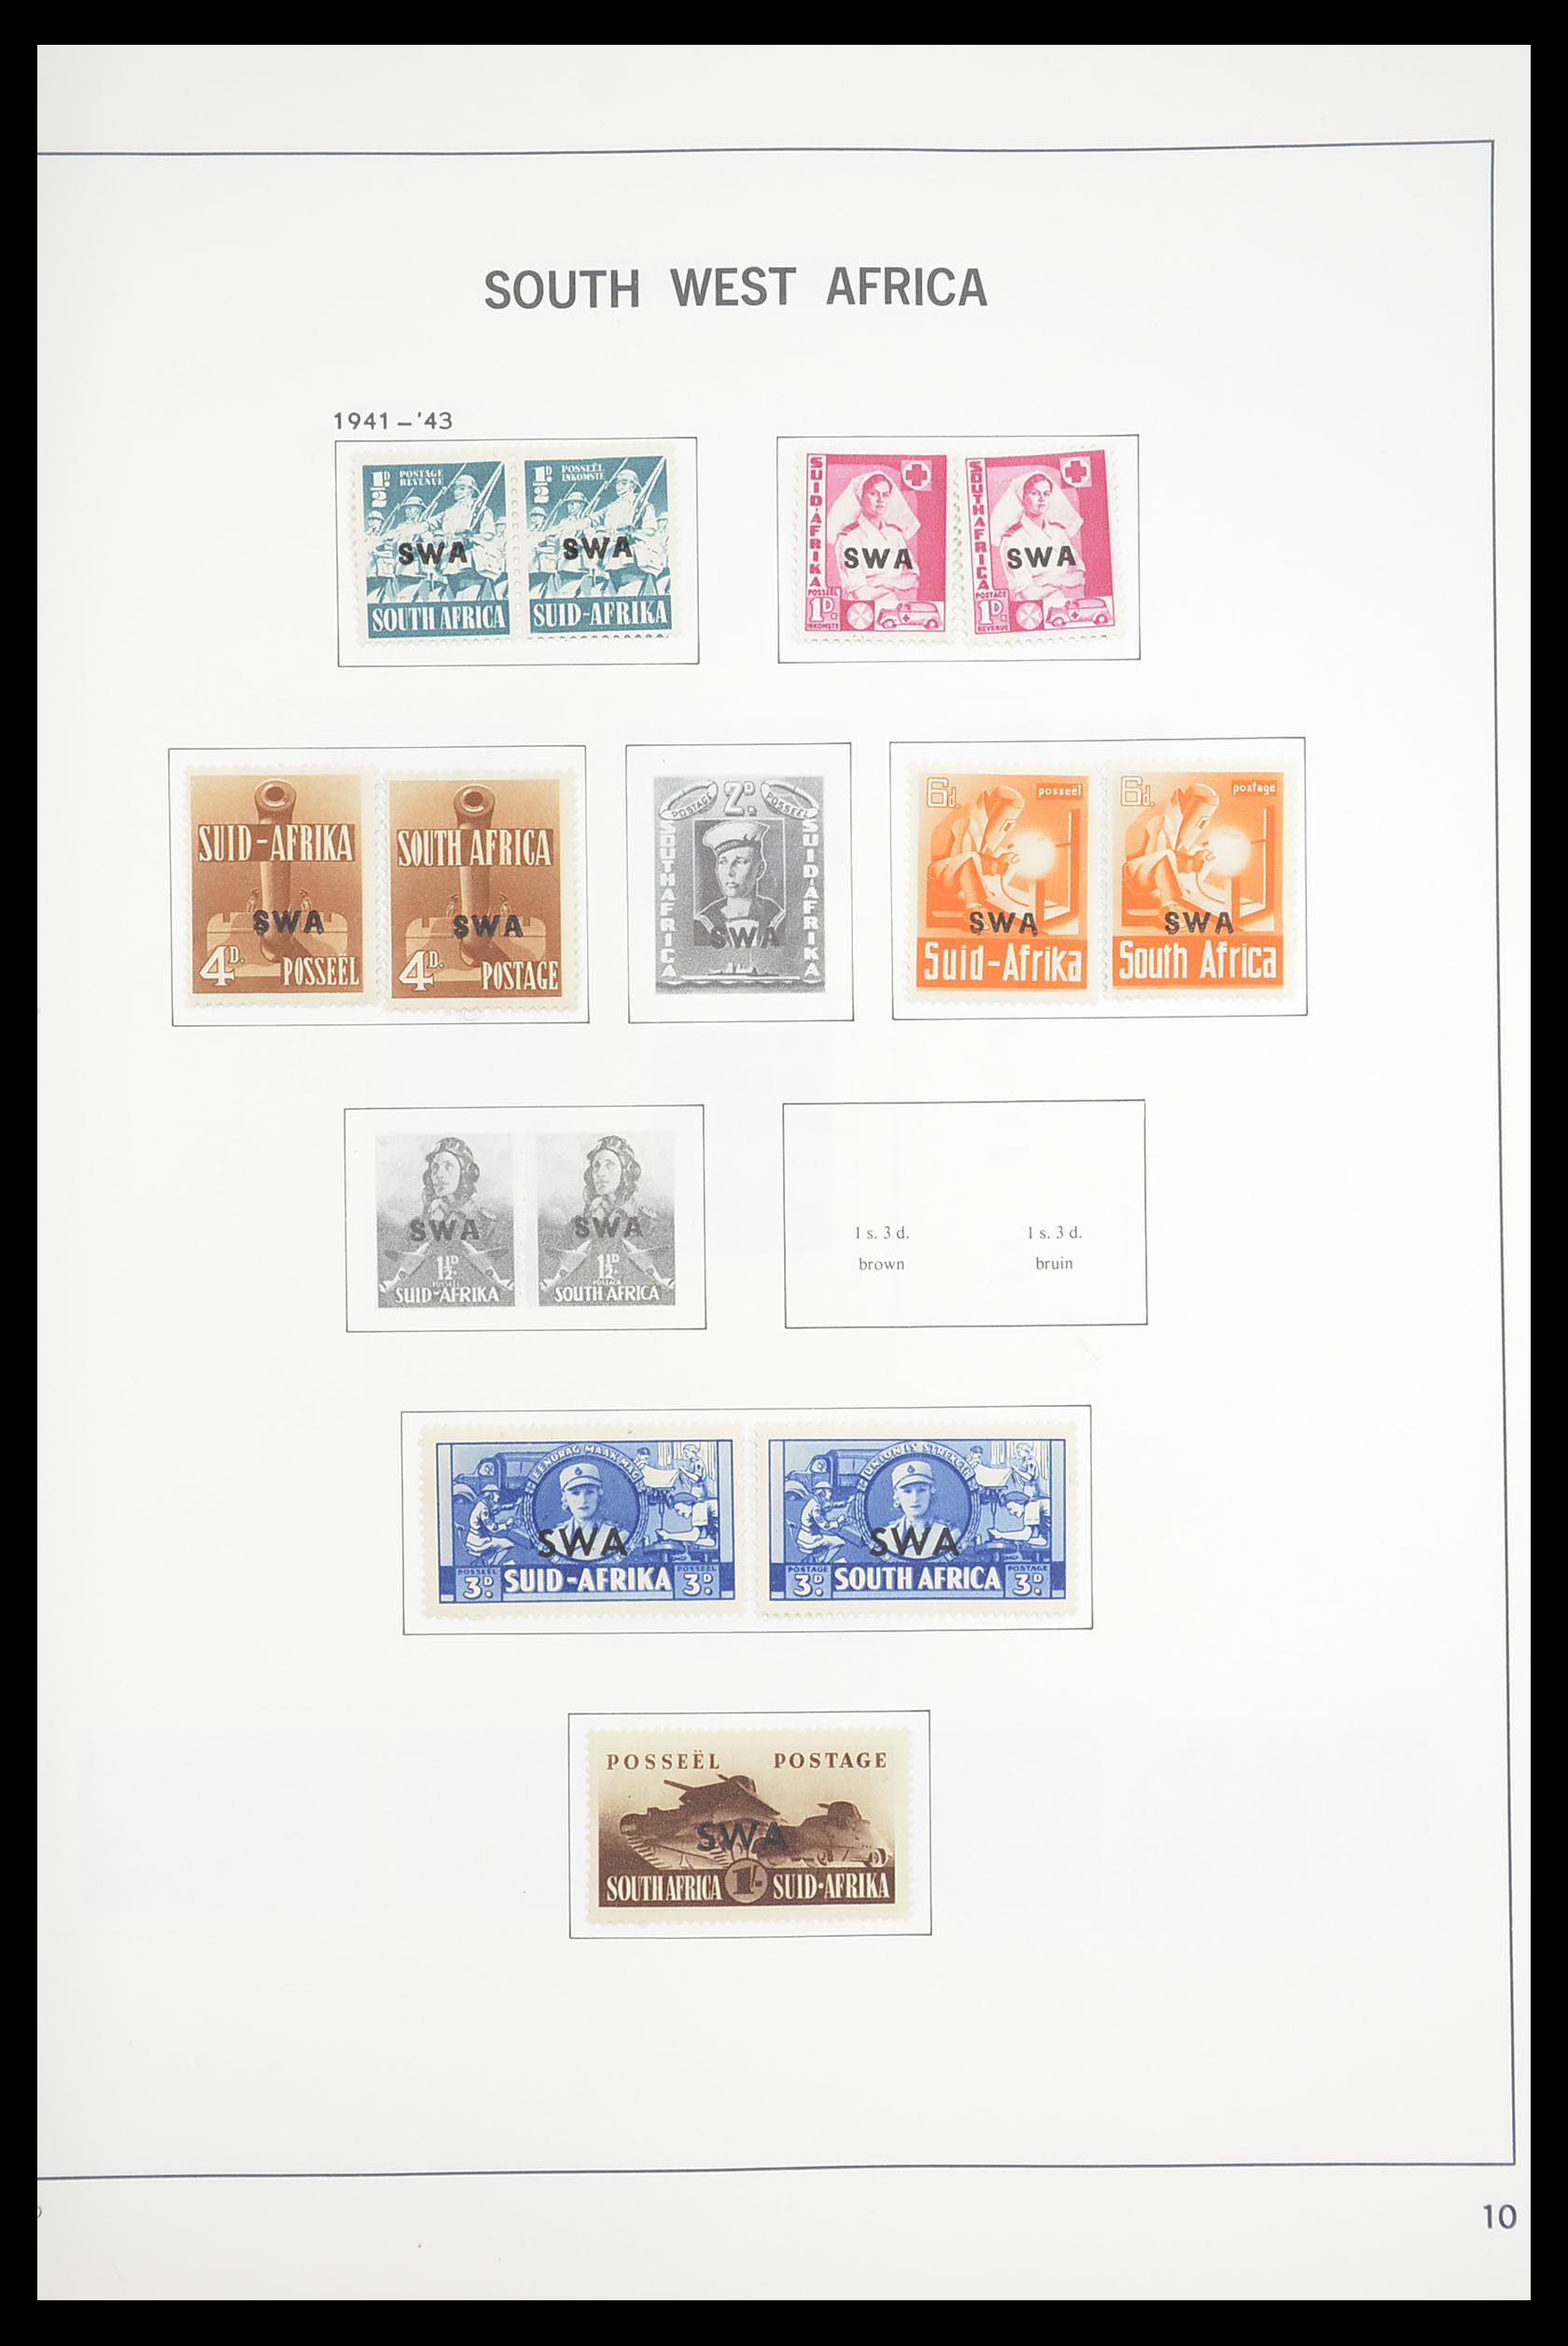 33393 094 - Stamp collection 33393 South Africa and territories 1910-1998.